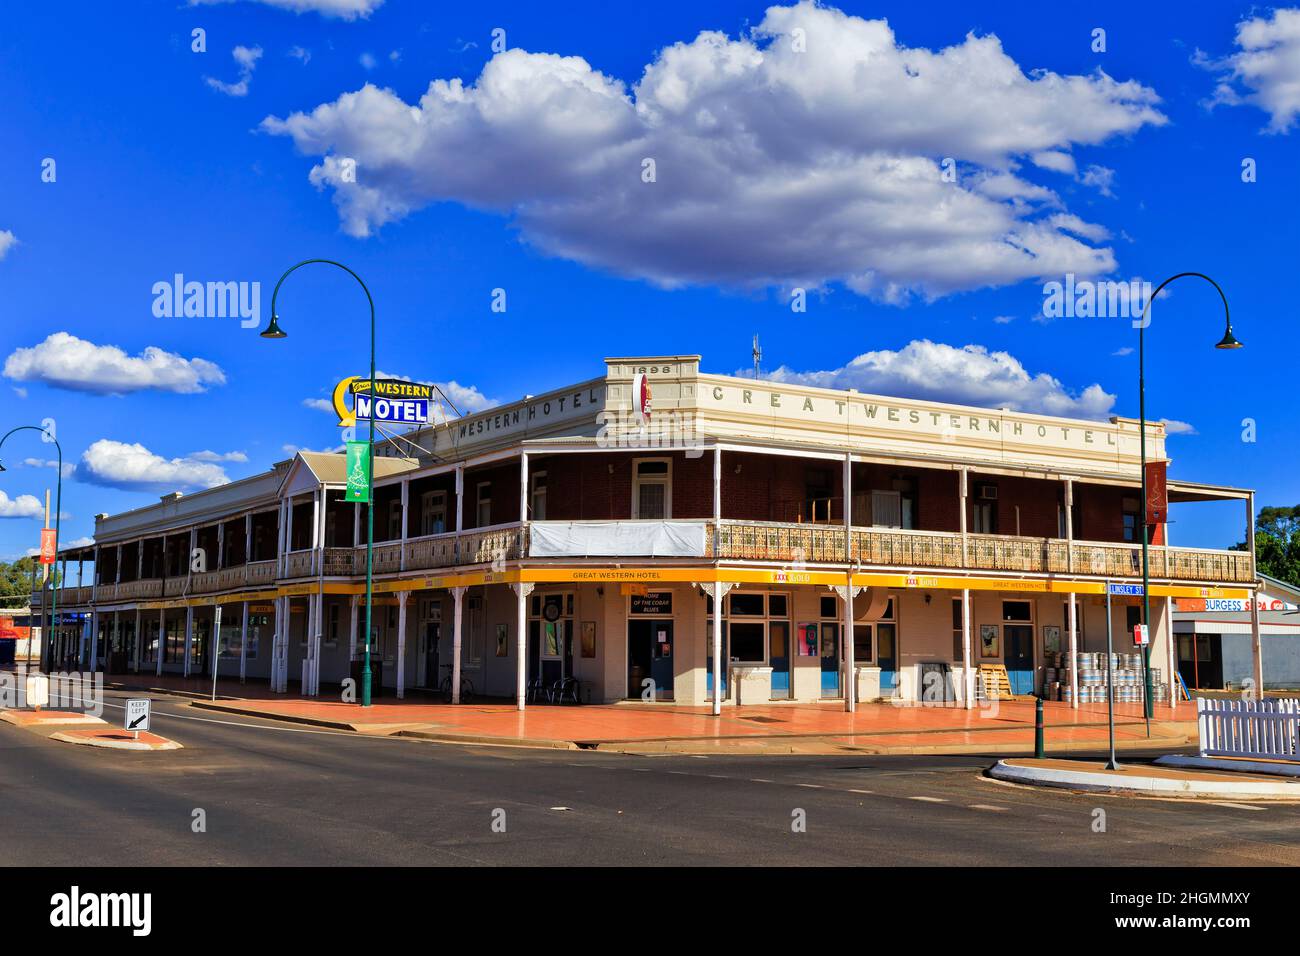 Cobar, Australia - 29 Dec 2021: Historic traditional Australian hotel and pub in outback - Cobar town. Stock Photo